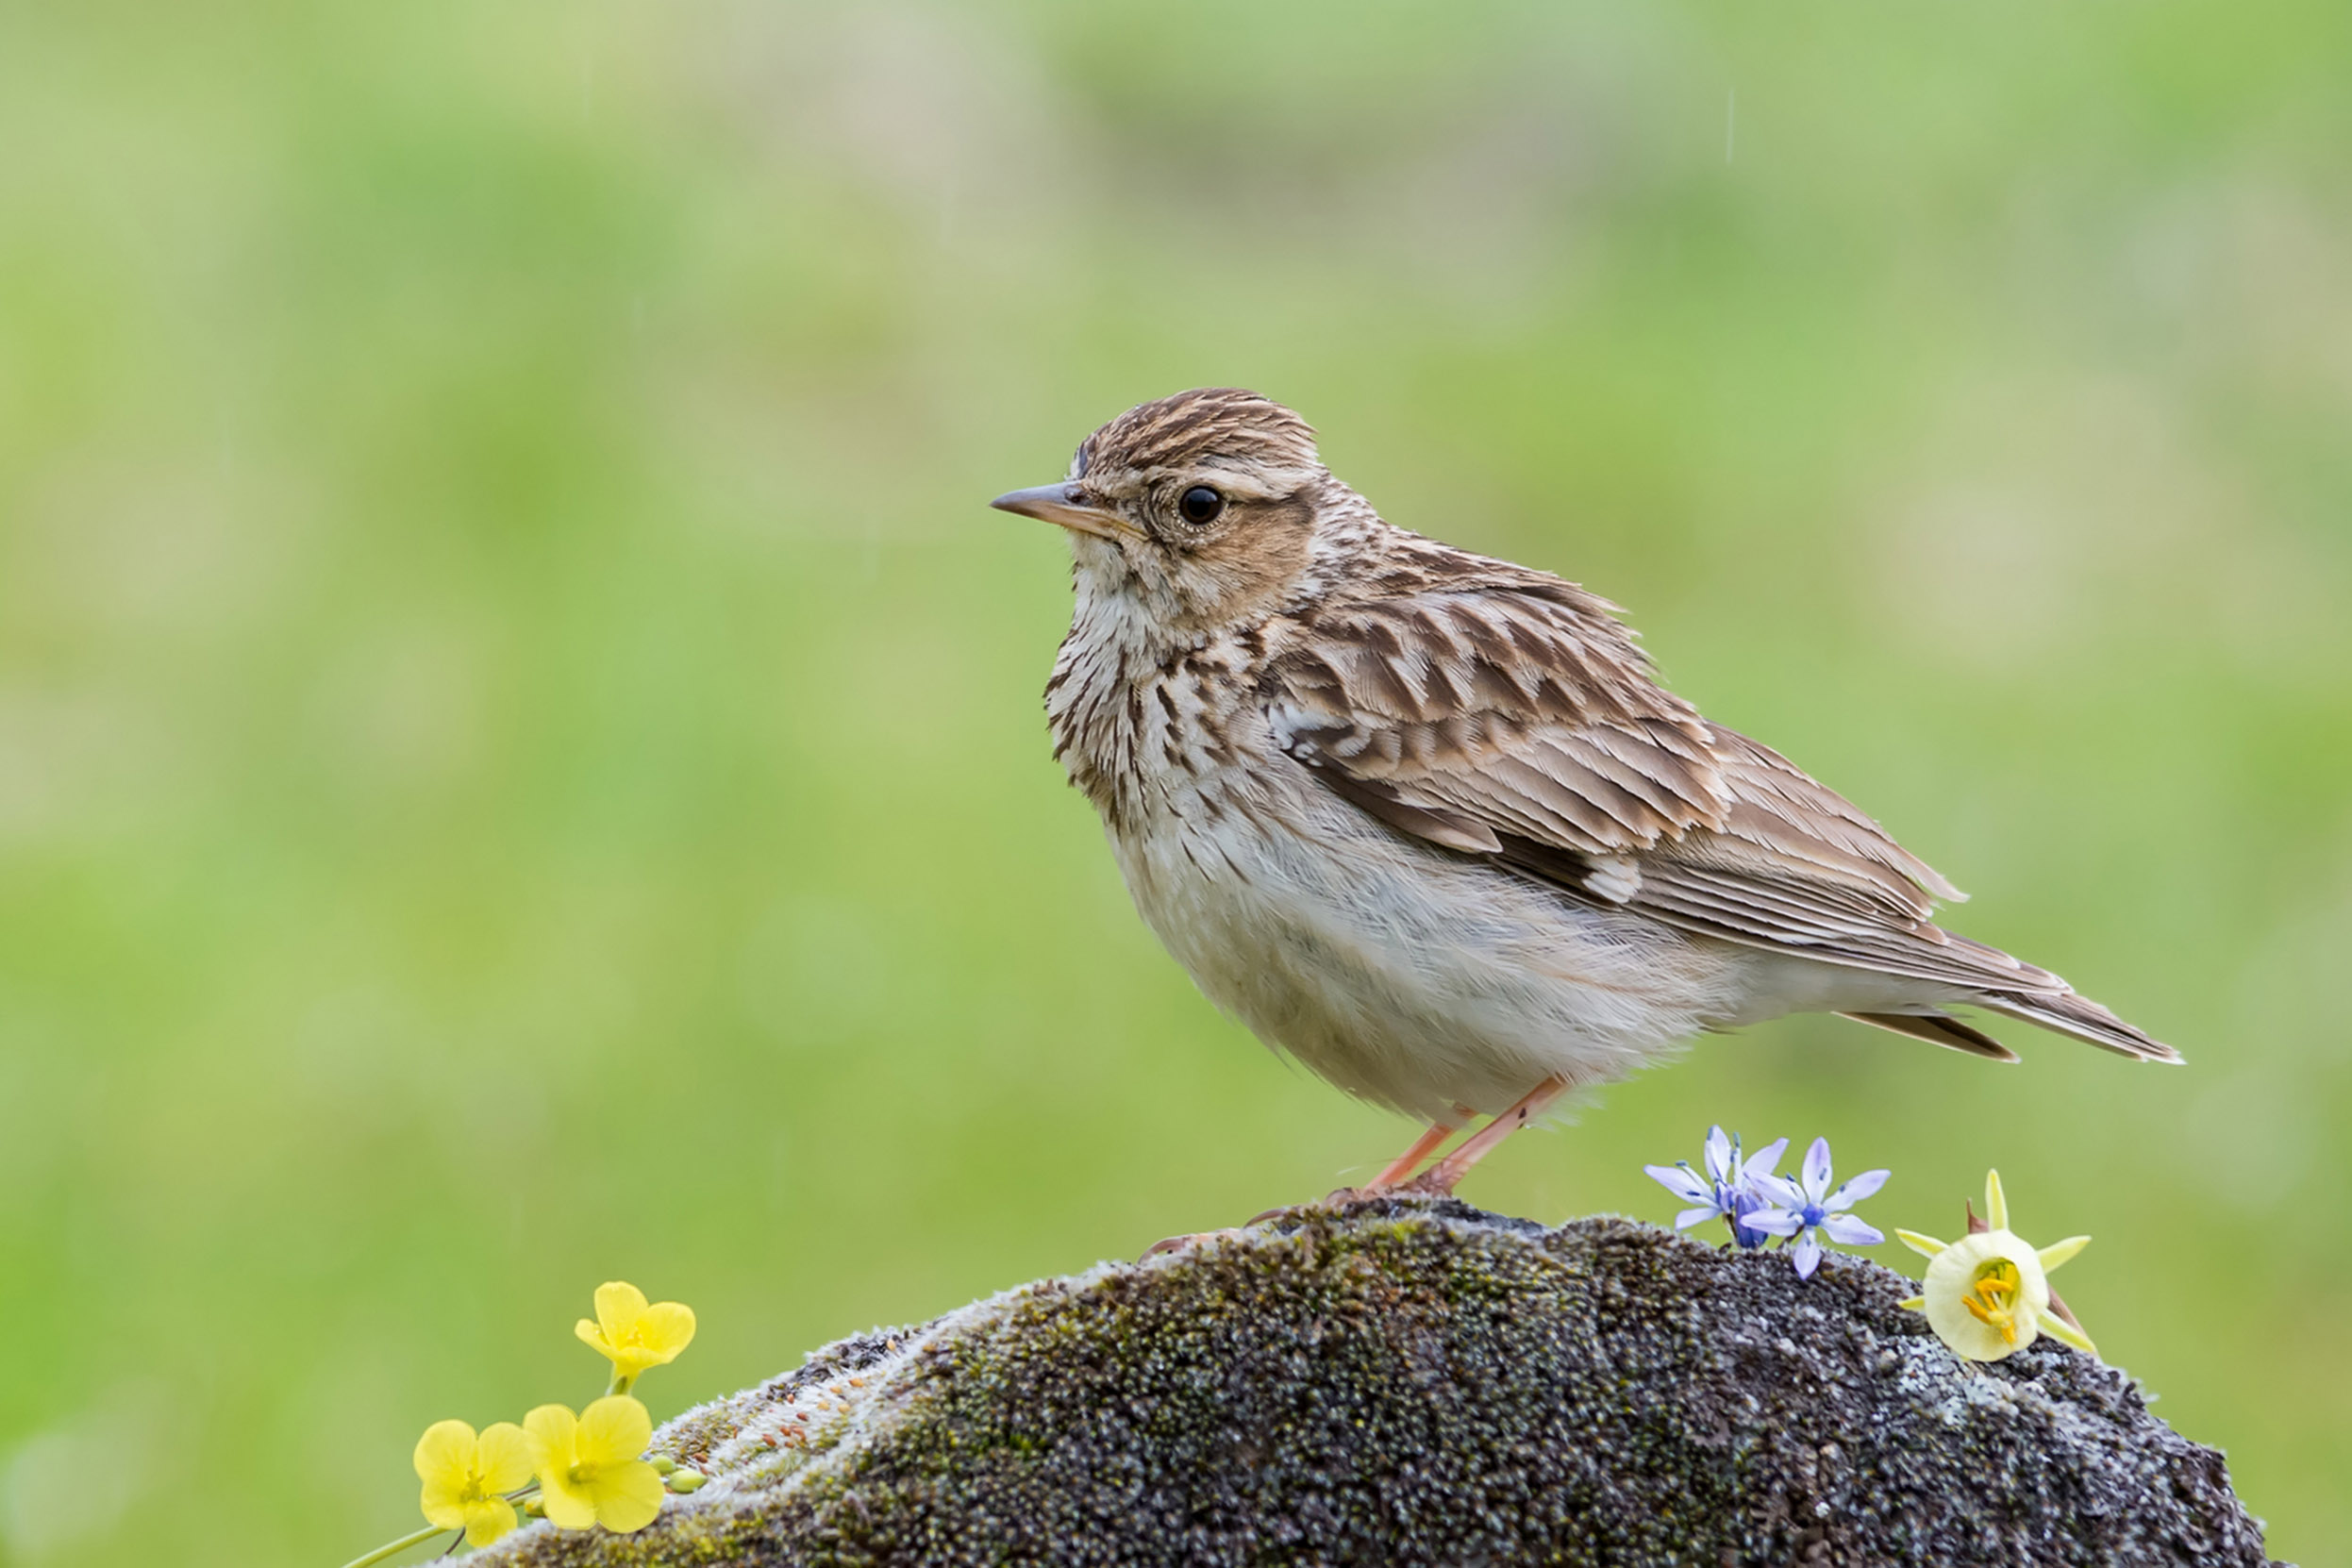 A lone Woodlark perched on a rock surrounded by grass and yellow flowers.